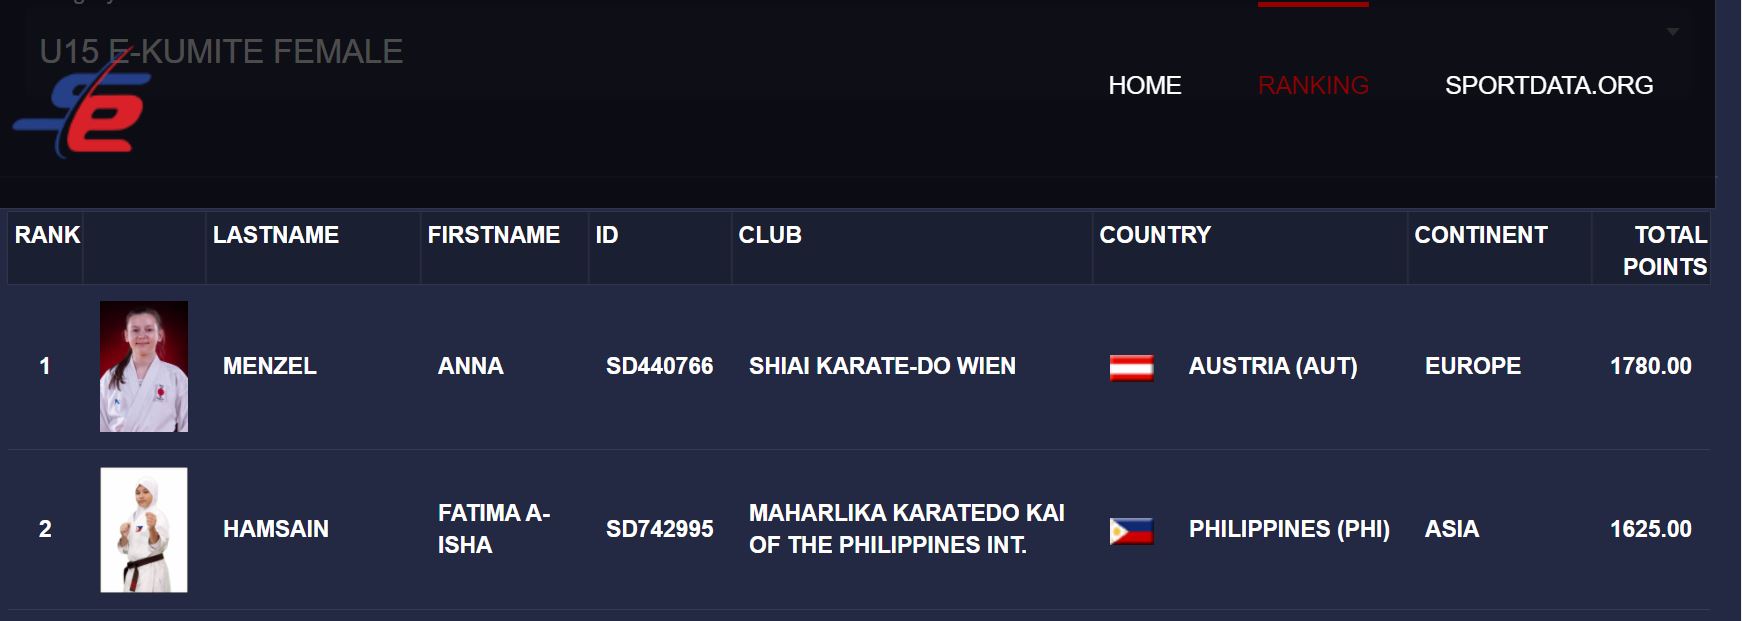 The Philippines' Fatima Hamsain is ranked No. 2 just 155 points behind Anna Menzel of Austria.